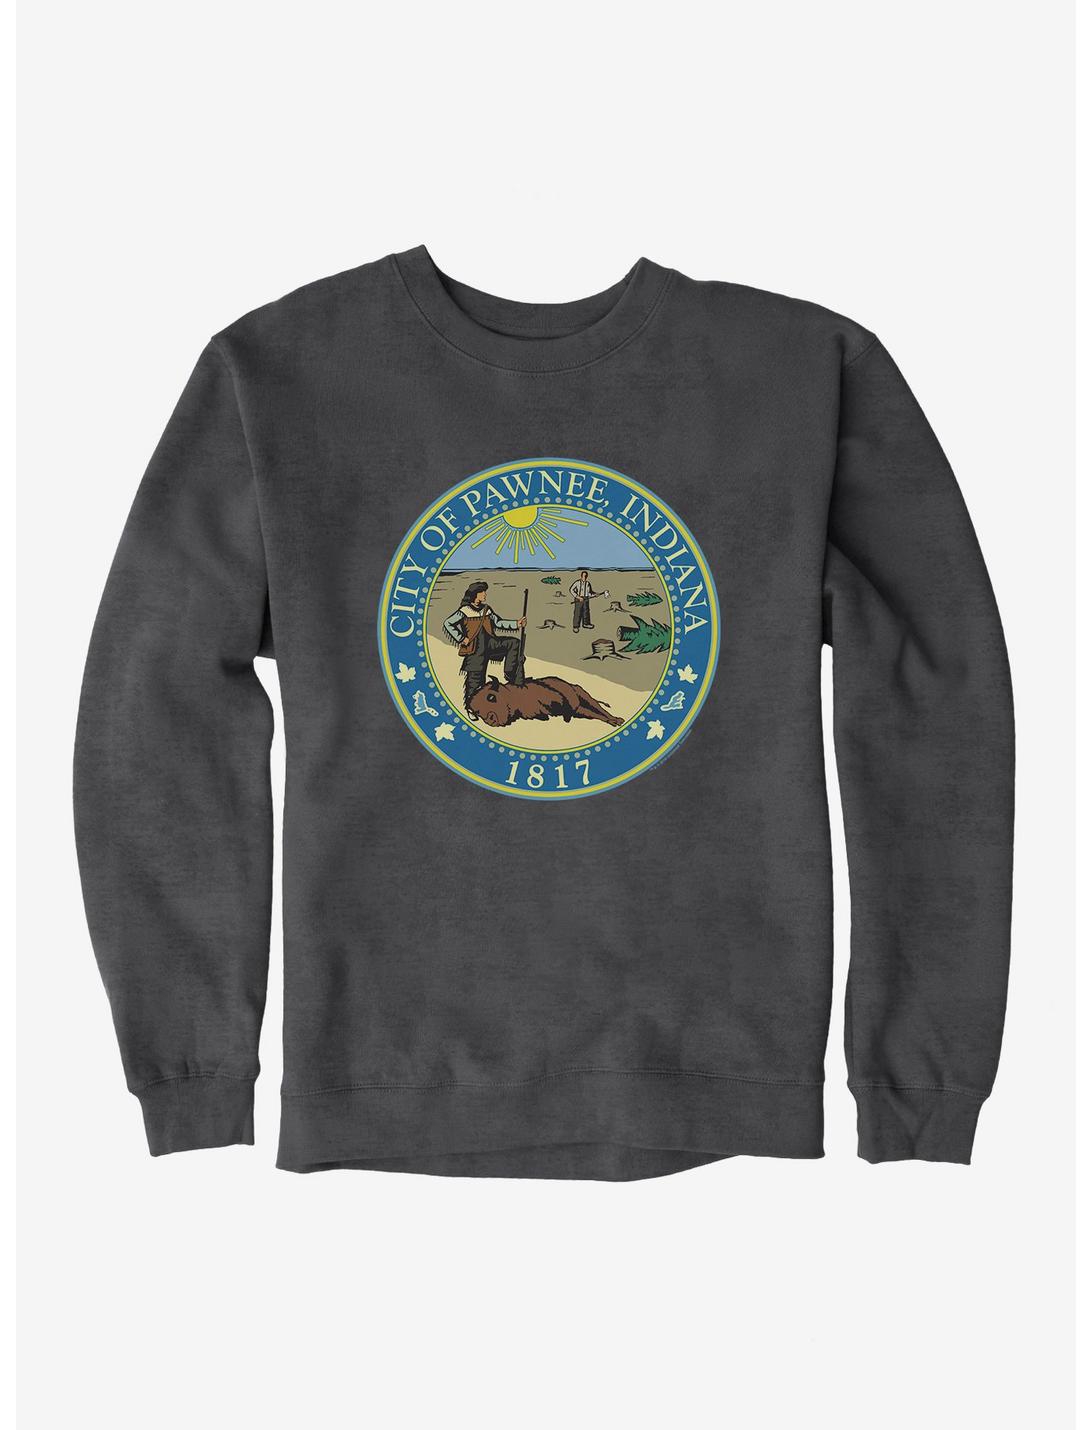 Parks And Recreation Pawnee Indiana Seal Sweatshirt, CHARCOAL HEATHER, hi-res